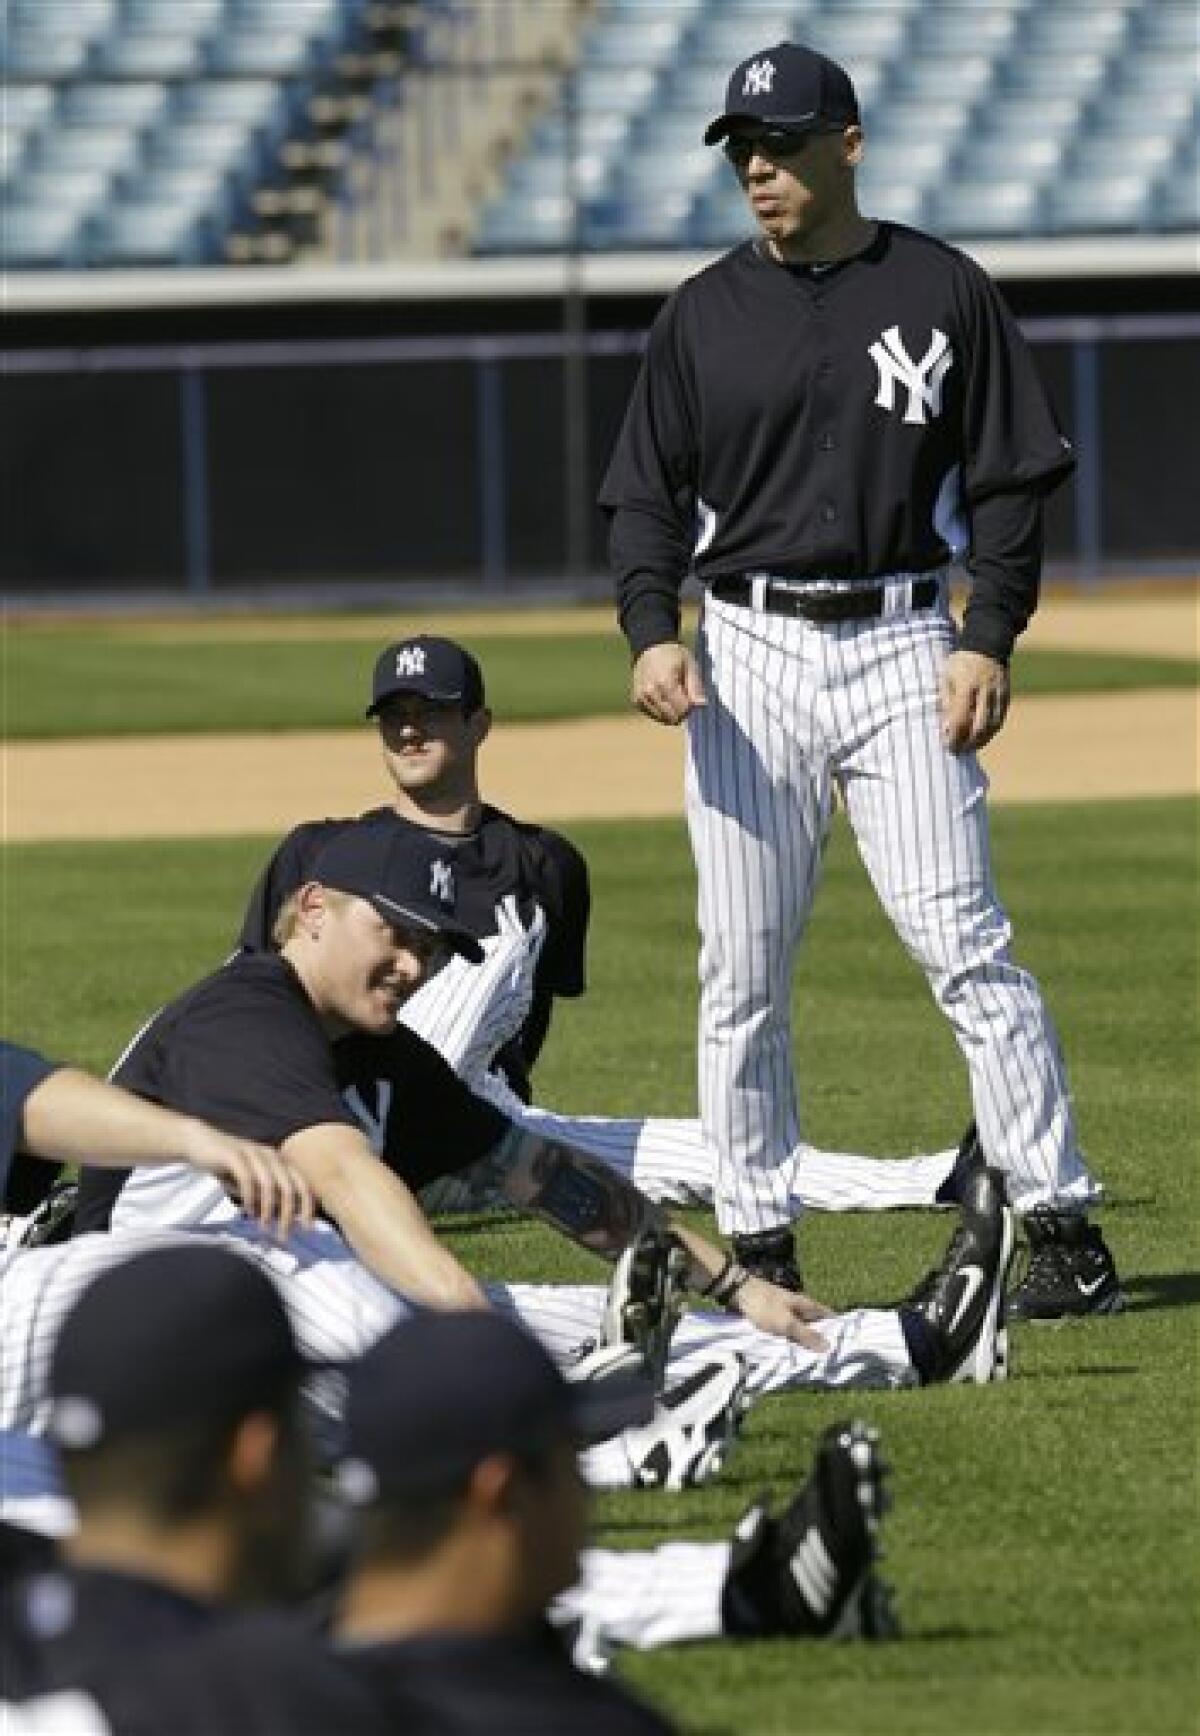 Jorge Posada wouldn't be surprised if Andy Pettitte changed his